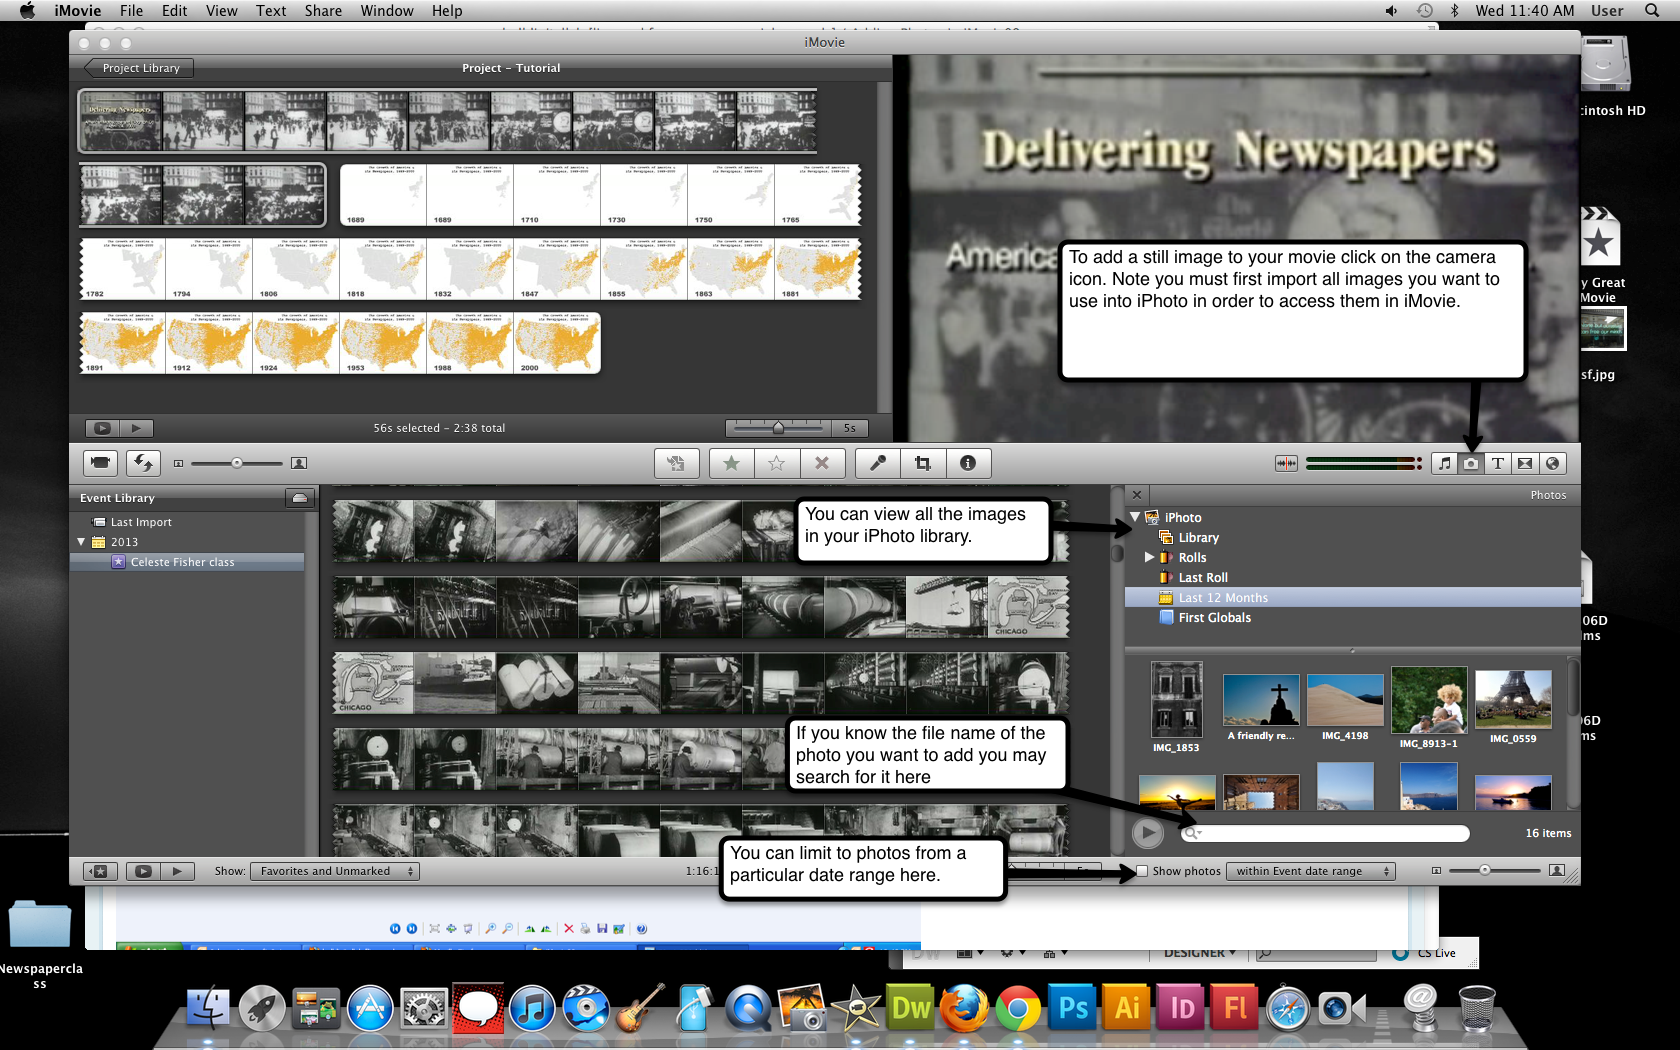 Visual guide to adding photos in iMovie '11